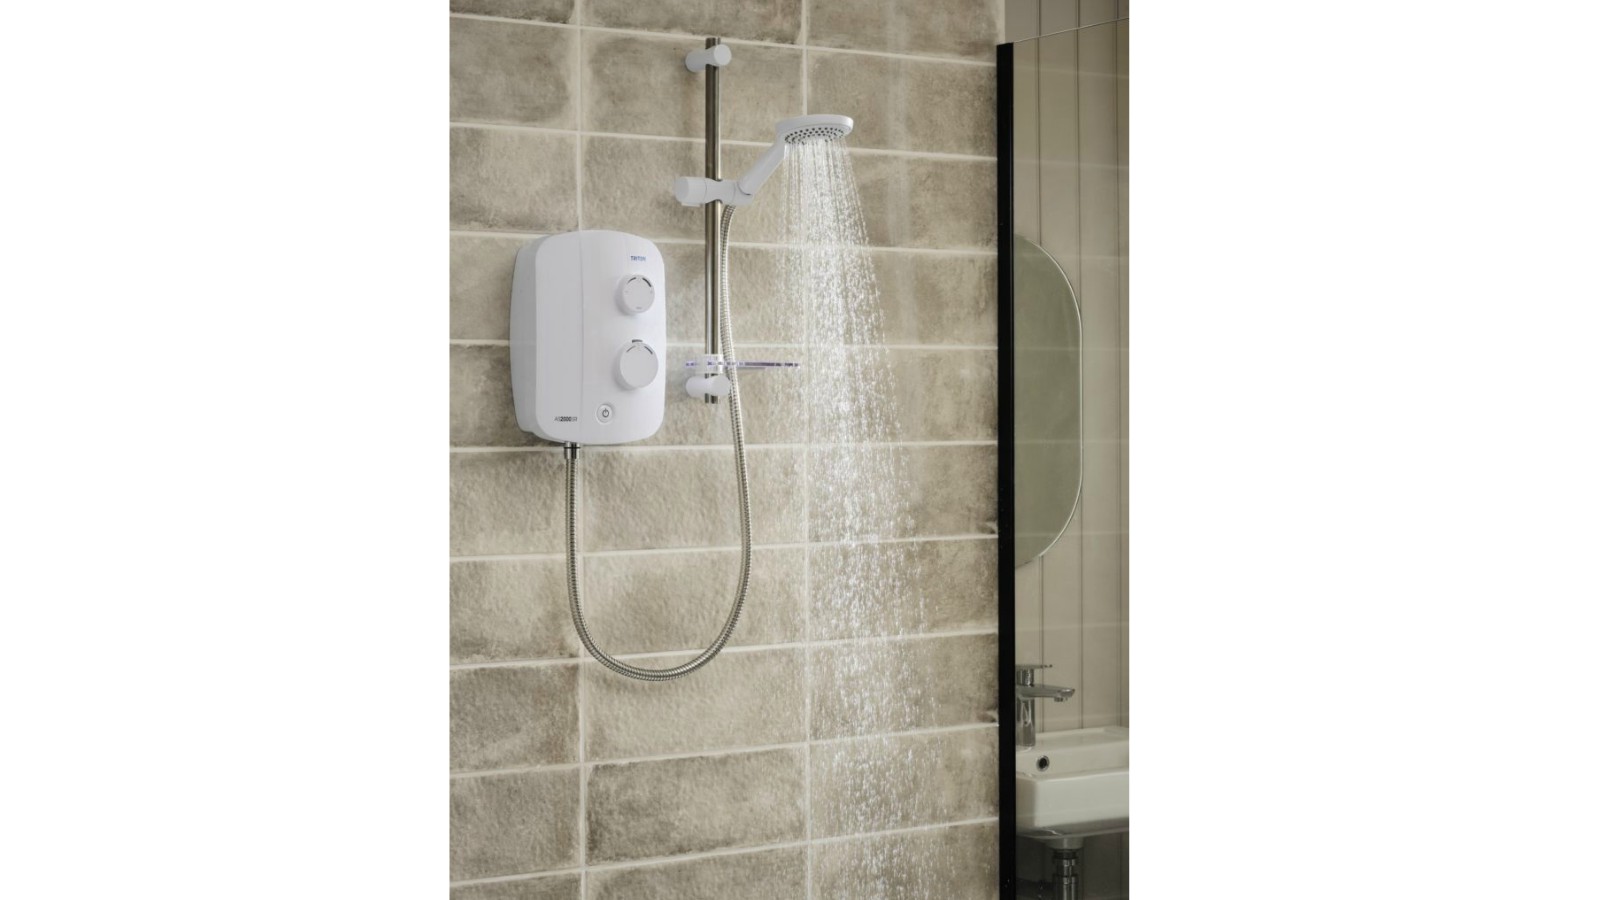 Quiet Mark approved power shower from Triton - KBN